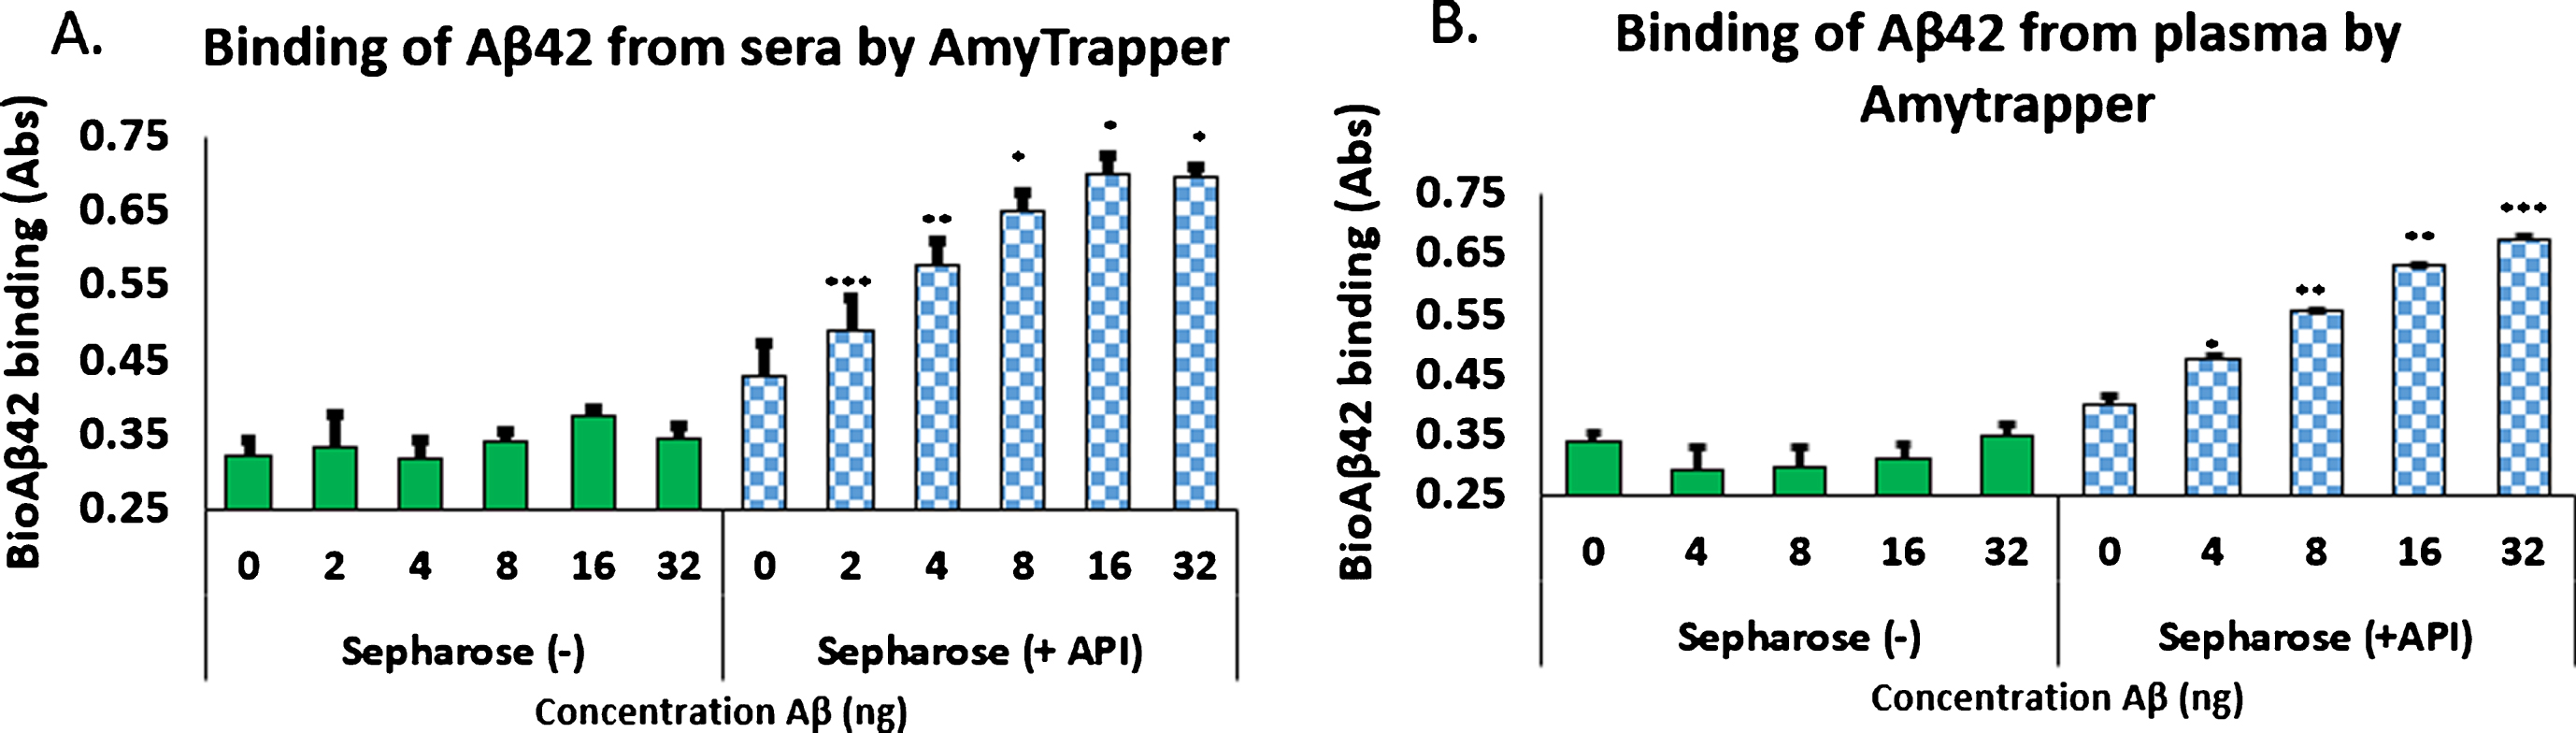 Binding of biotinylated Aβ42 to Amytrapper in (A) human serum spiked with bio-Aβ42 and (B) human plasma spiked with bio-Aβ42. Sepharose (–) act as a negative control. Values are expressed in absorbance units presented as Mean±SEM from triplicate measurements. A) Student’s t-test was used to determine significance. *p < 0.05, **p < 0.01, ***p < 0.001. B) Student’s t-test was used to determine significance. *p < 0.05, **p < 0.01, ***p < 0.001.